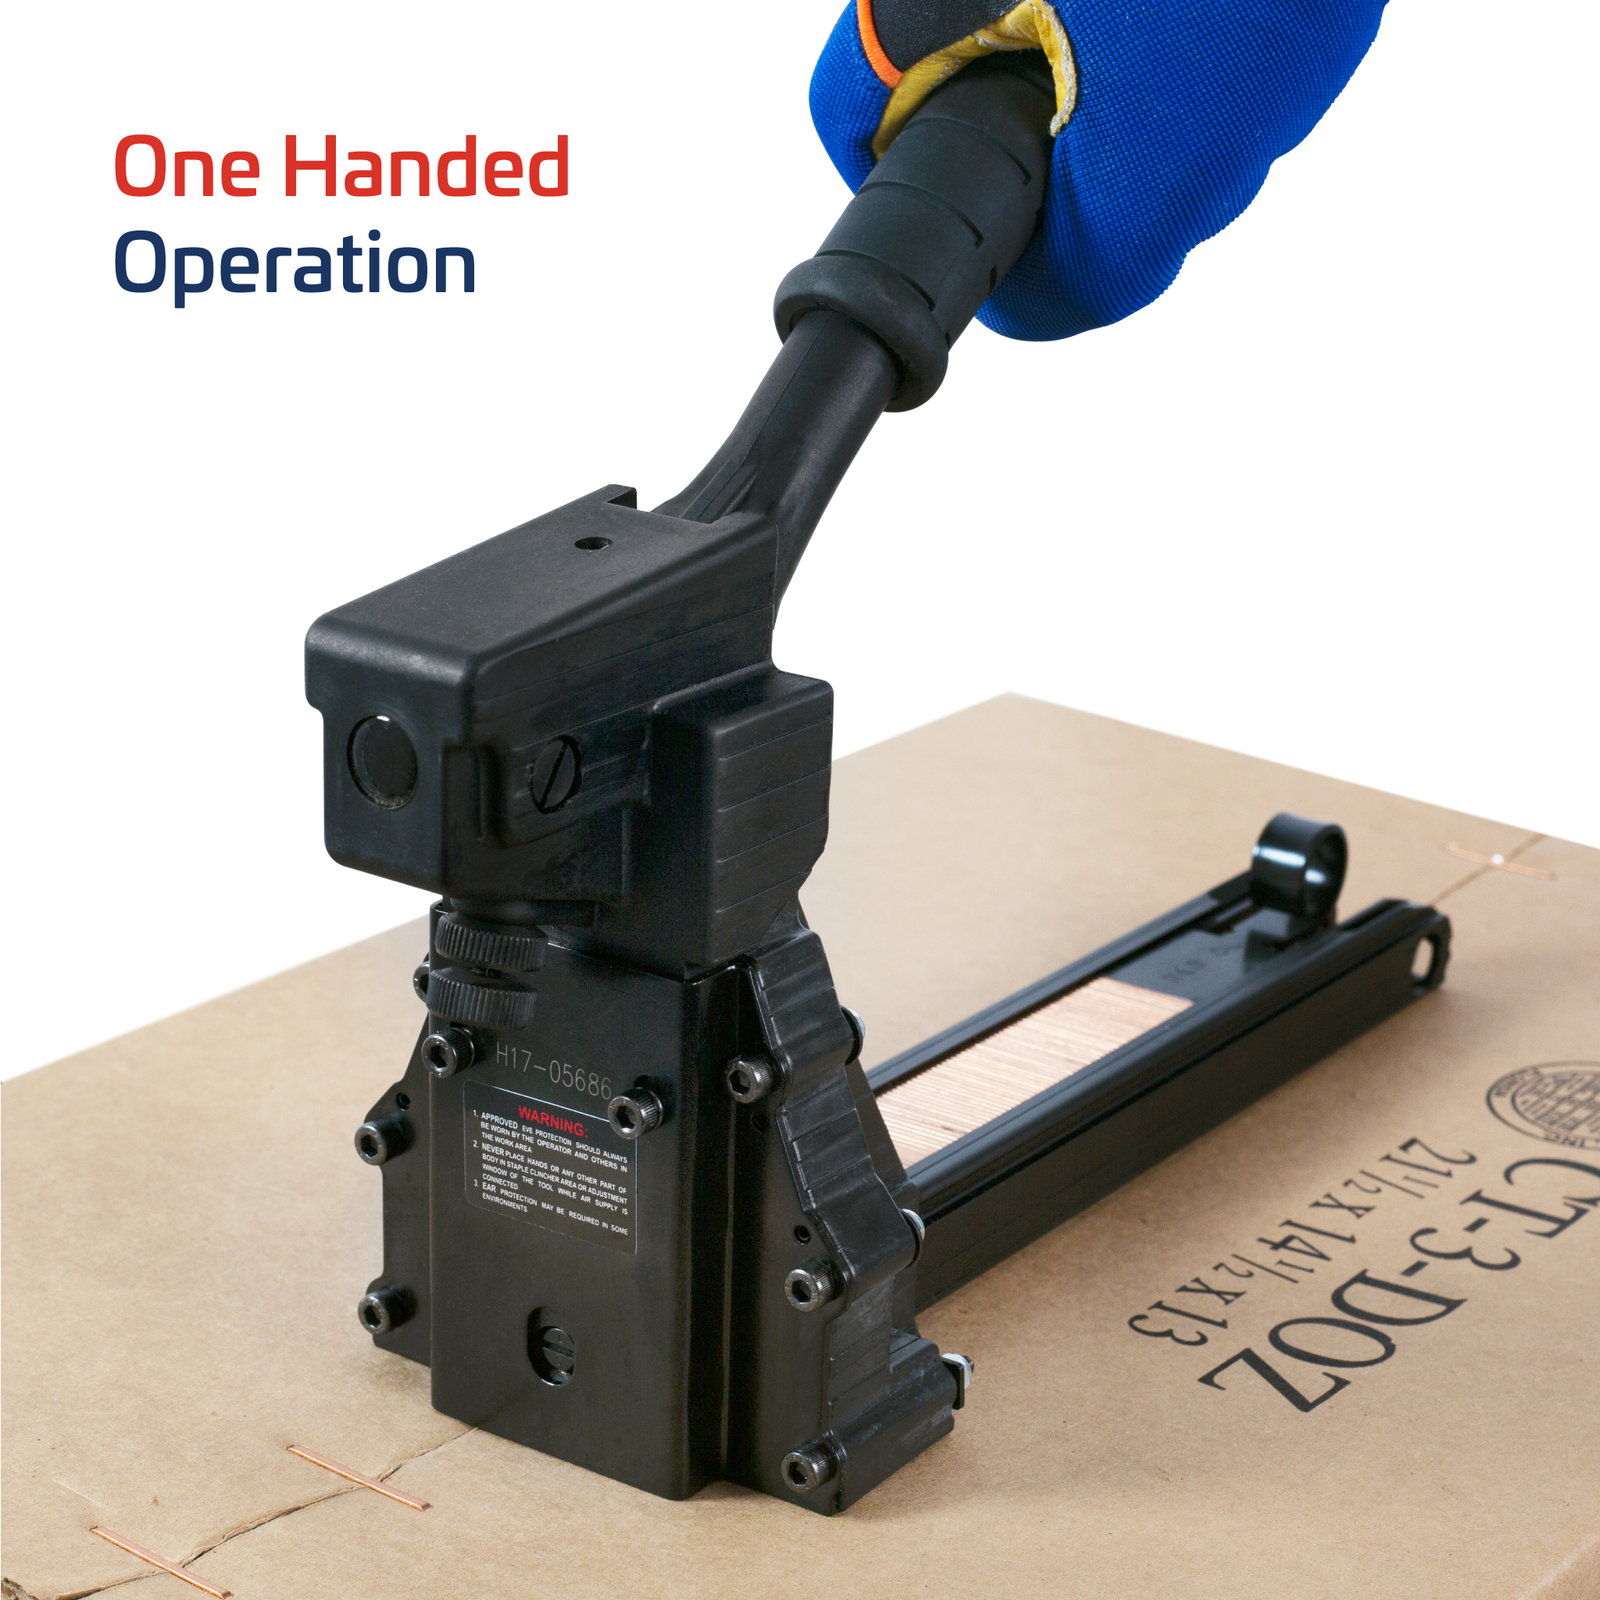 operator wearing blue gloves holding onto black handle stapling brown cardboard box.  Red and blue title states 